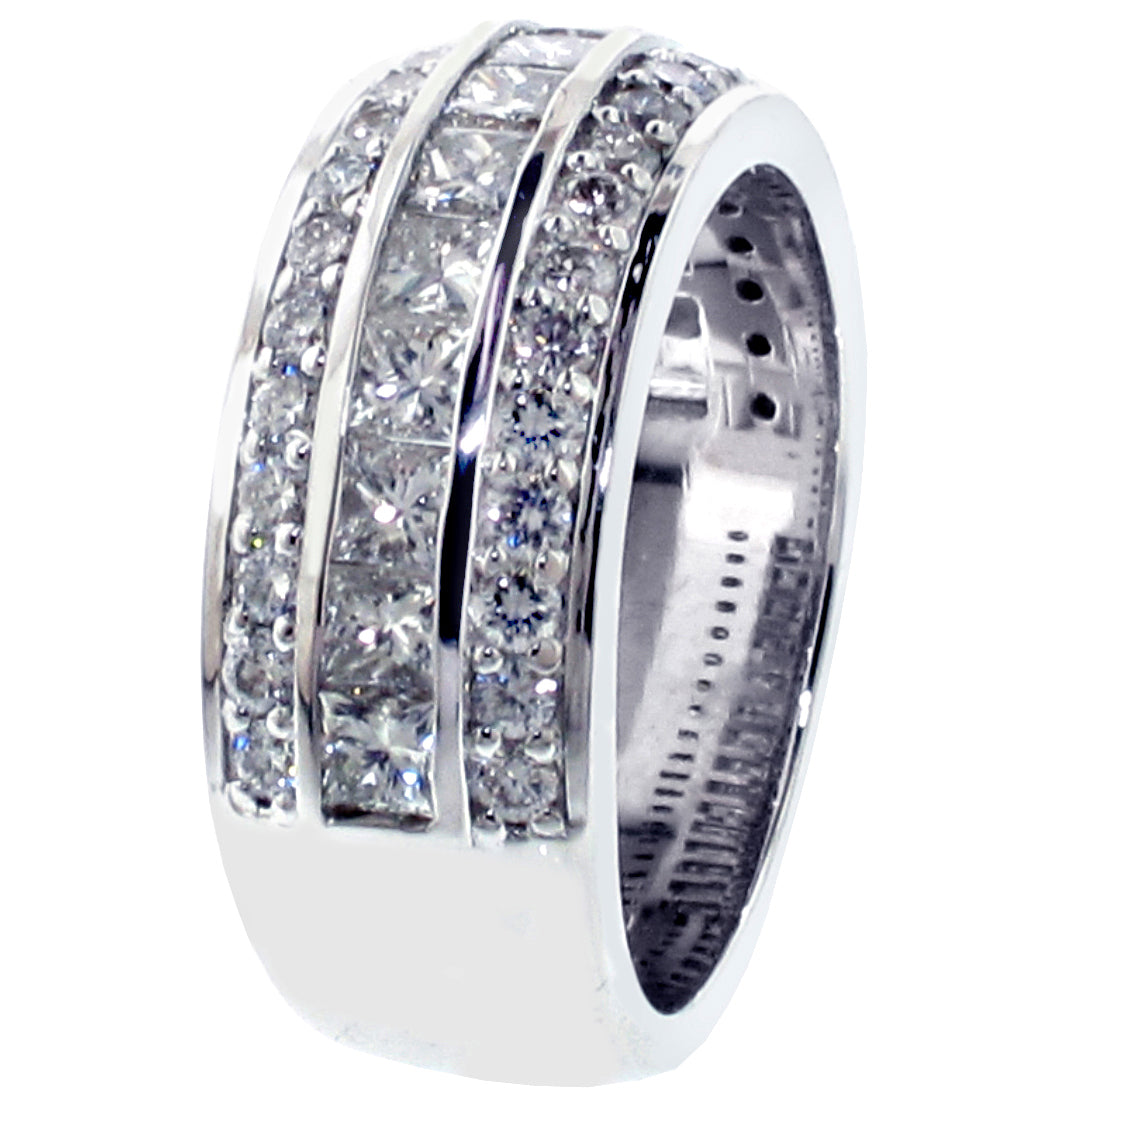 2.00 CT Princess & Round Cut Diamond Wedding Band in 14k White/Yellow Gold Channel & Pave Setting